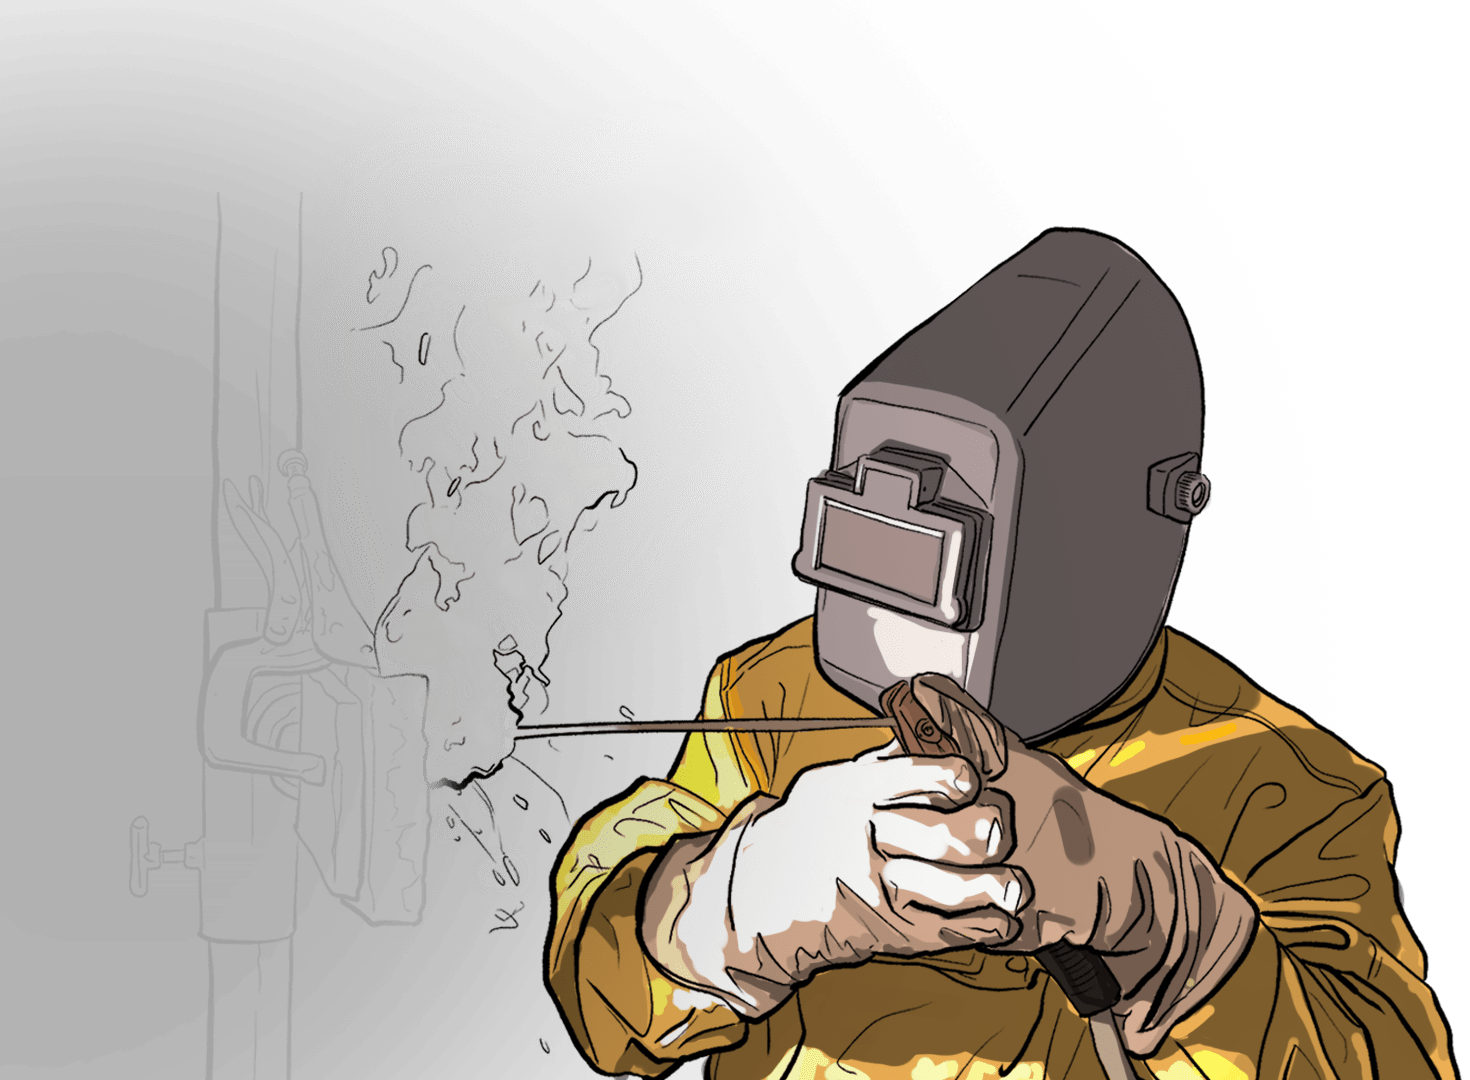 A more fleshed out illustration of a Summit College welding student learning hands-on.